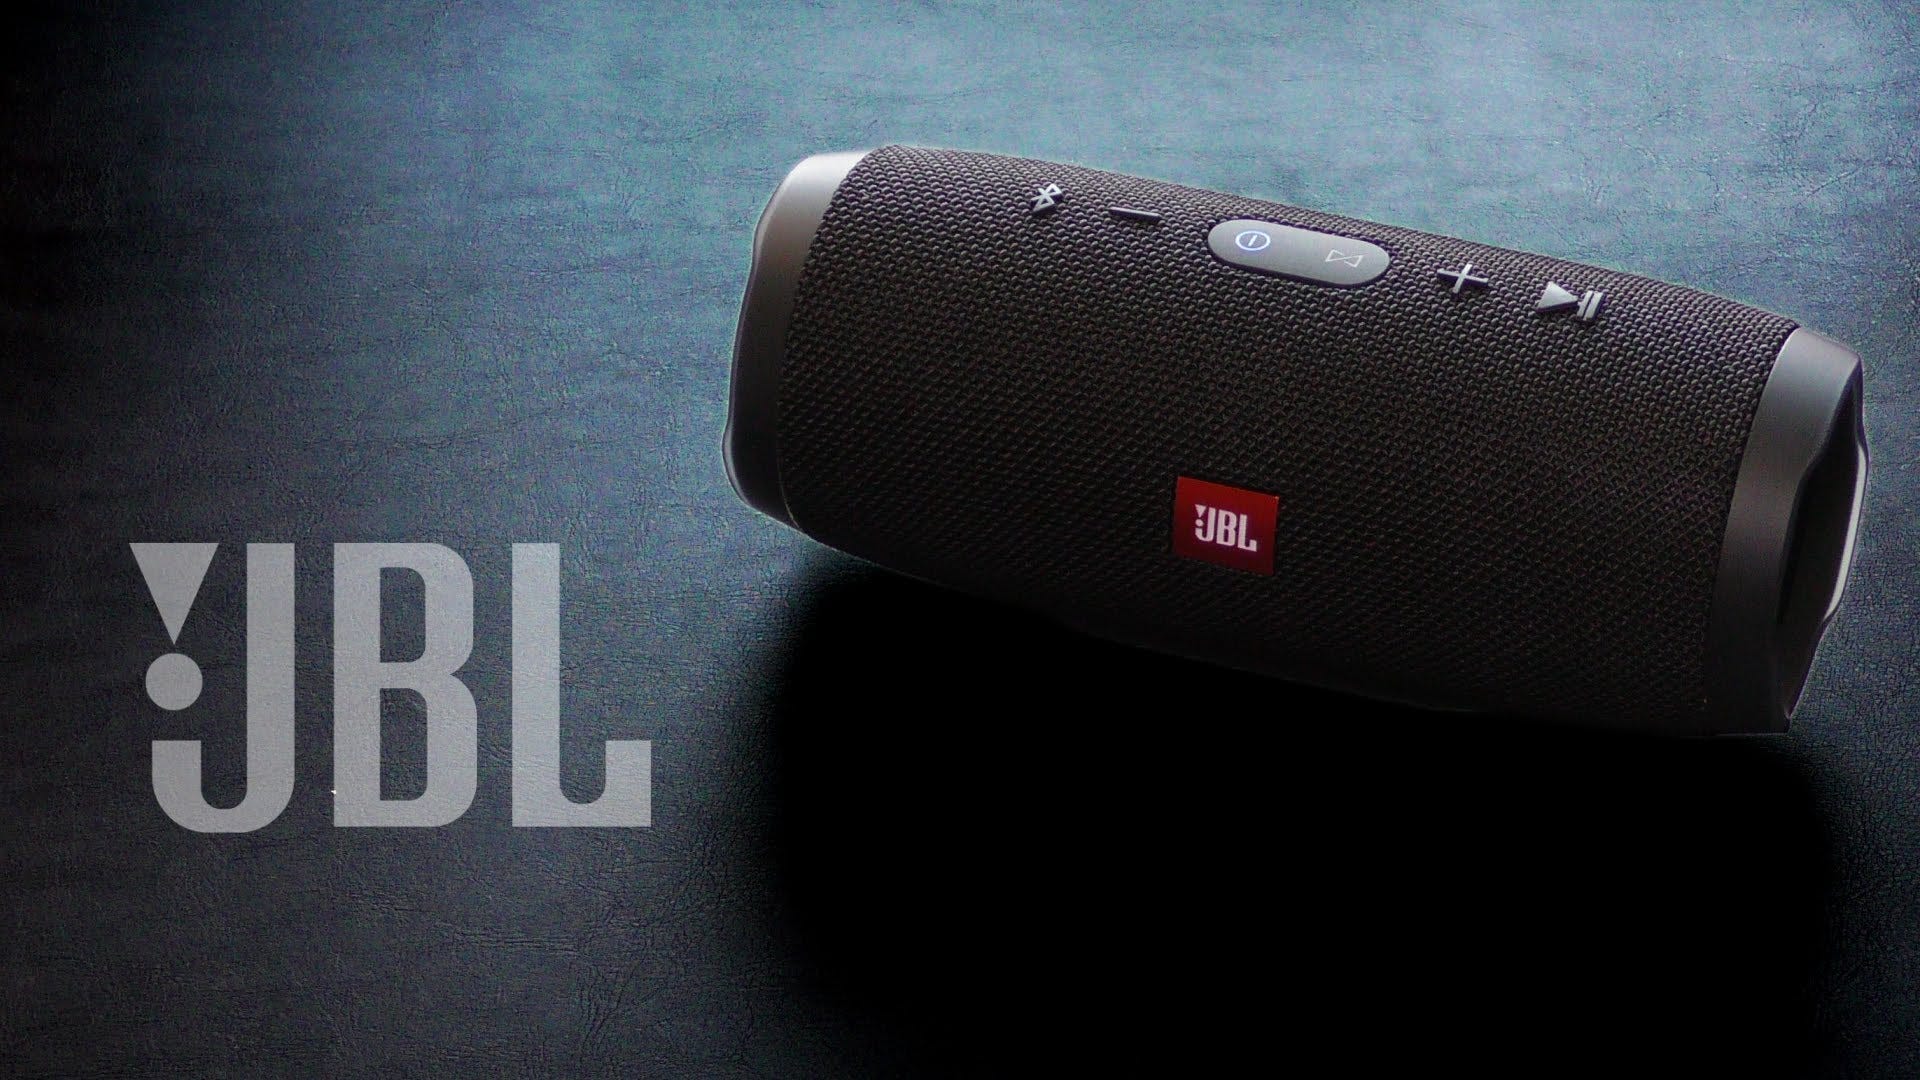 jbl charge 3 dimensions in inches